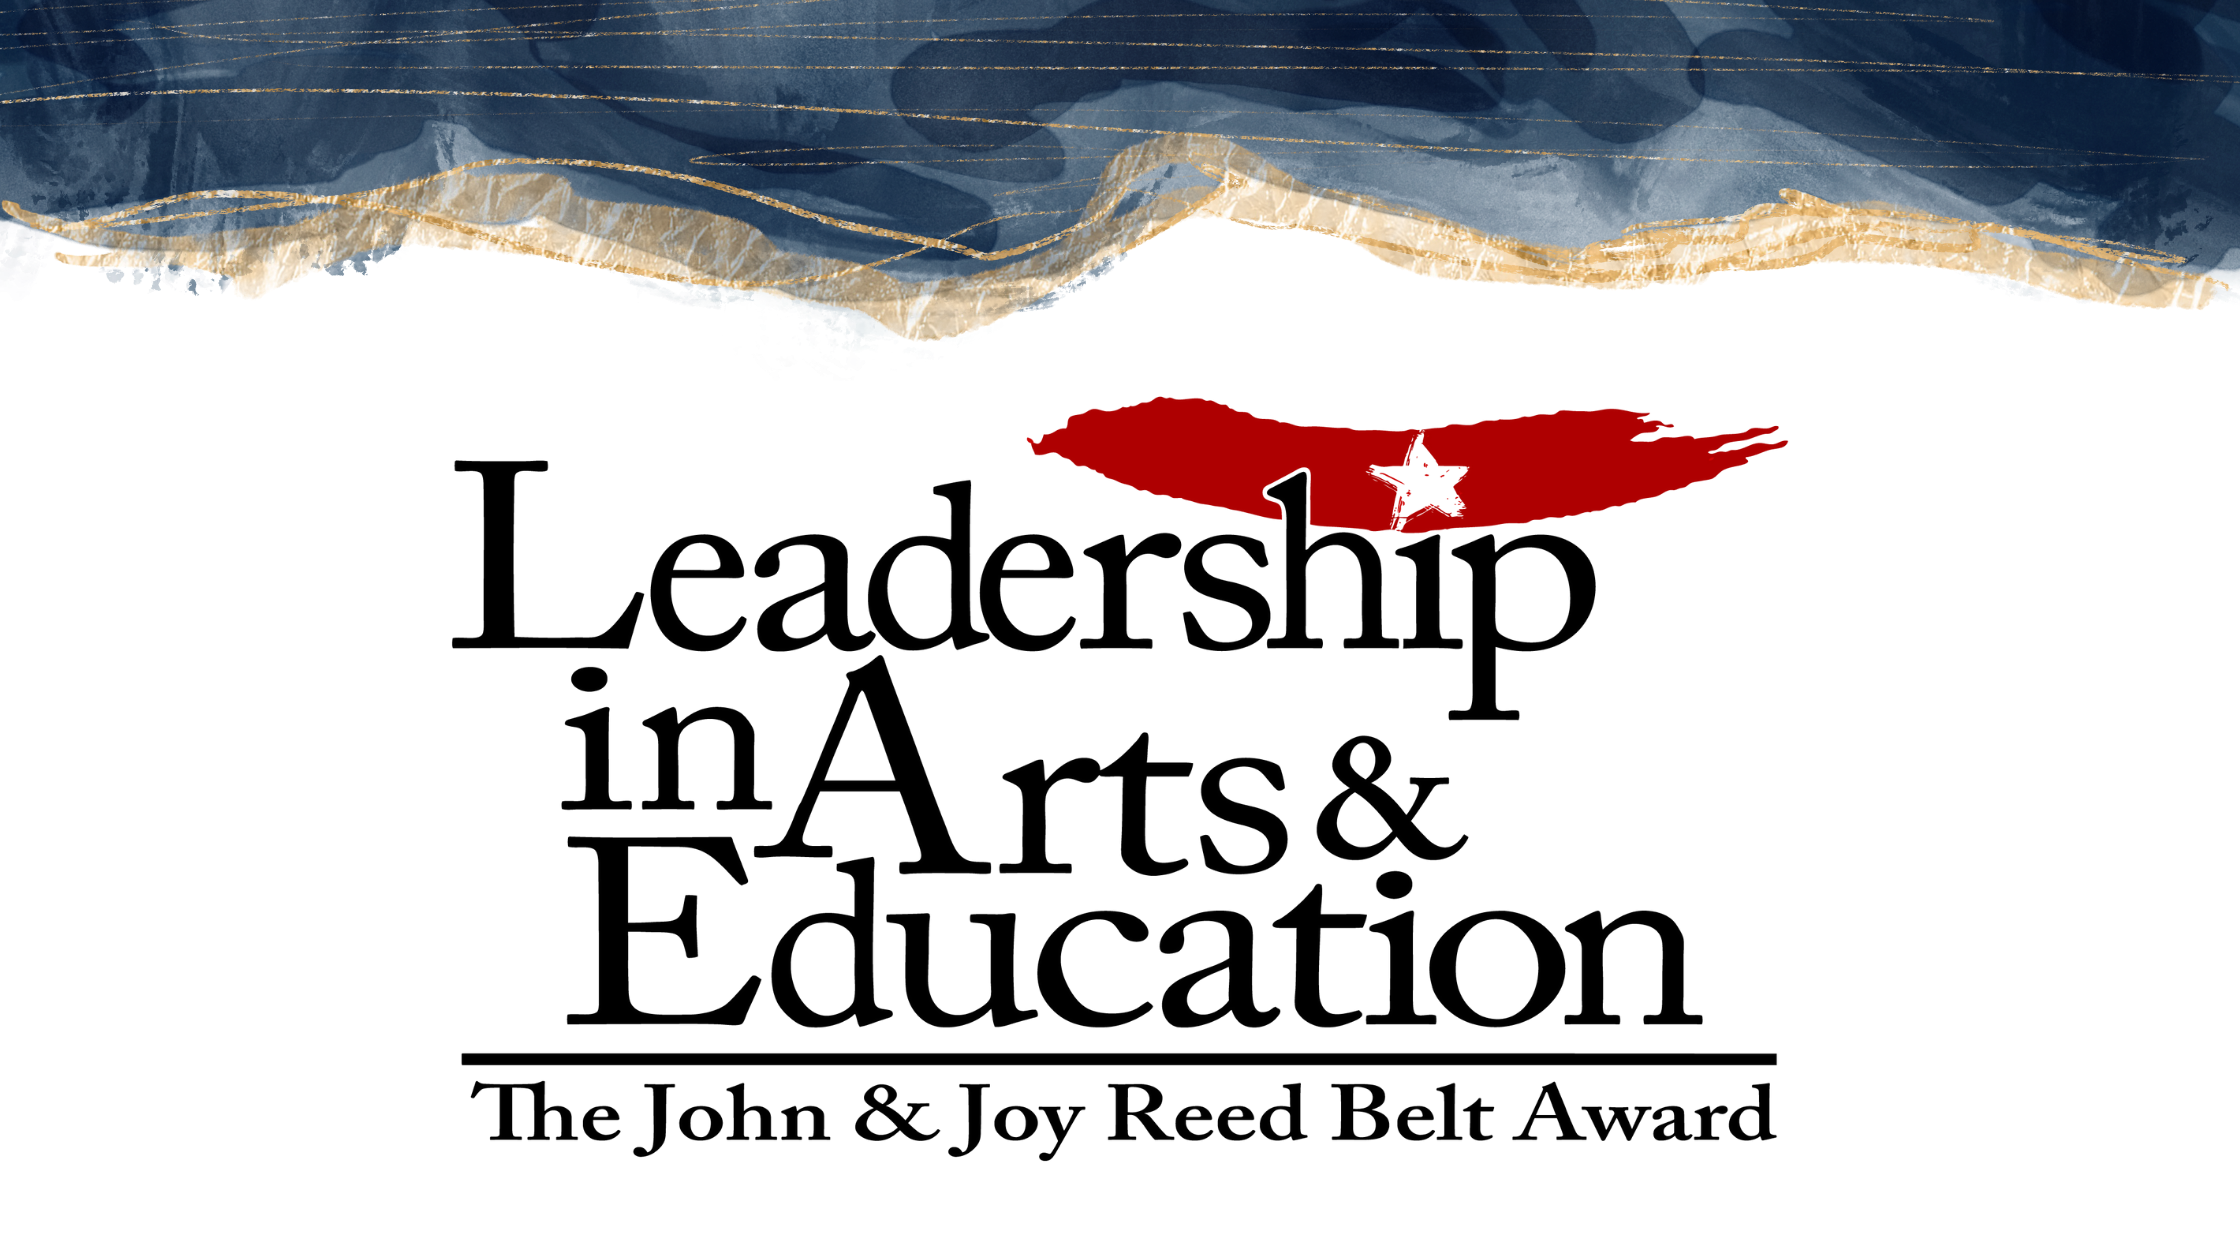 Foundation Announces Leadership in Arts & Education Honorees